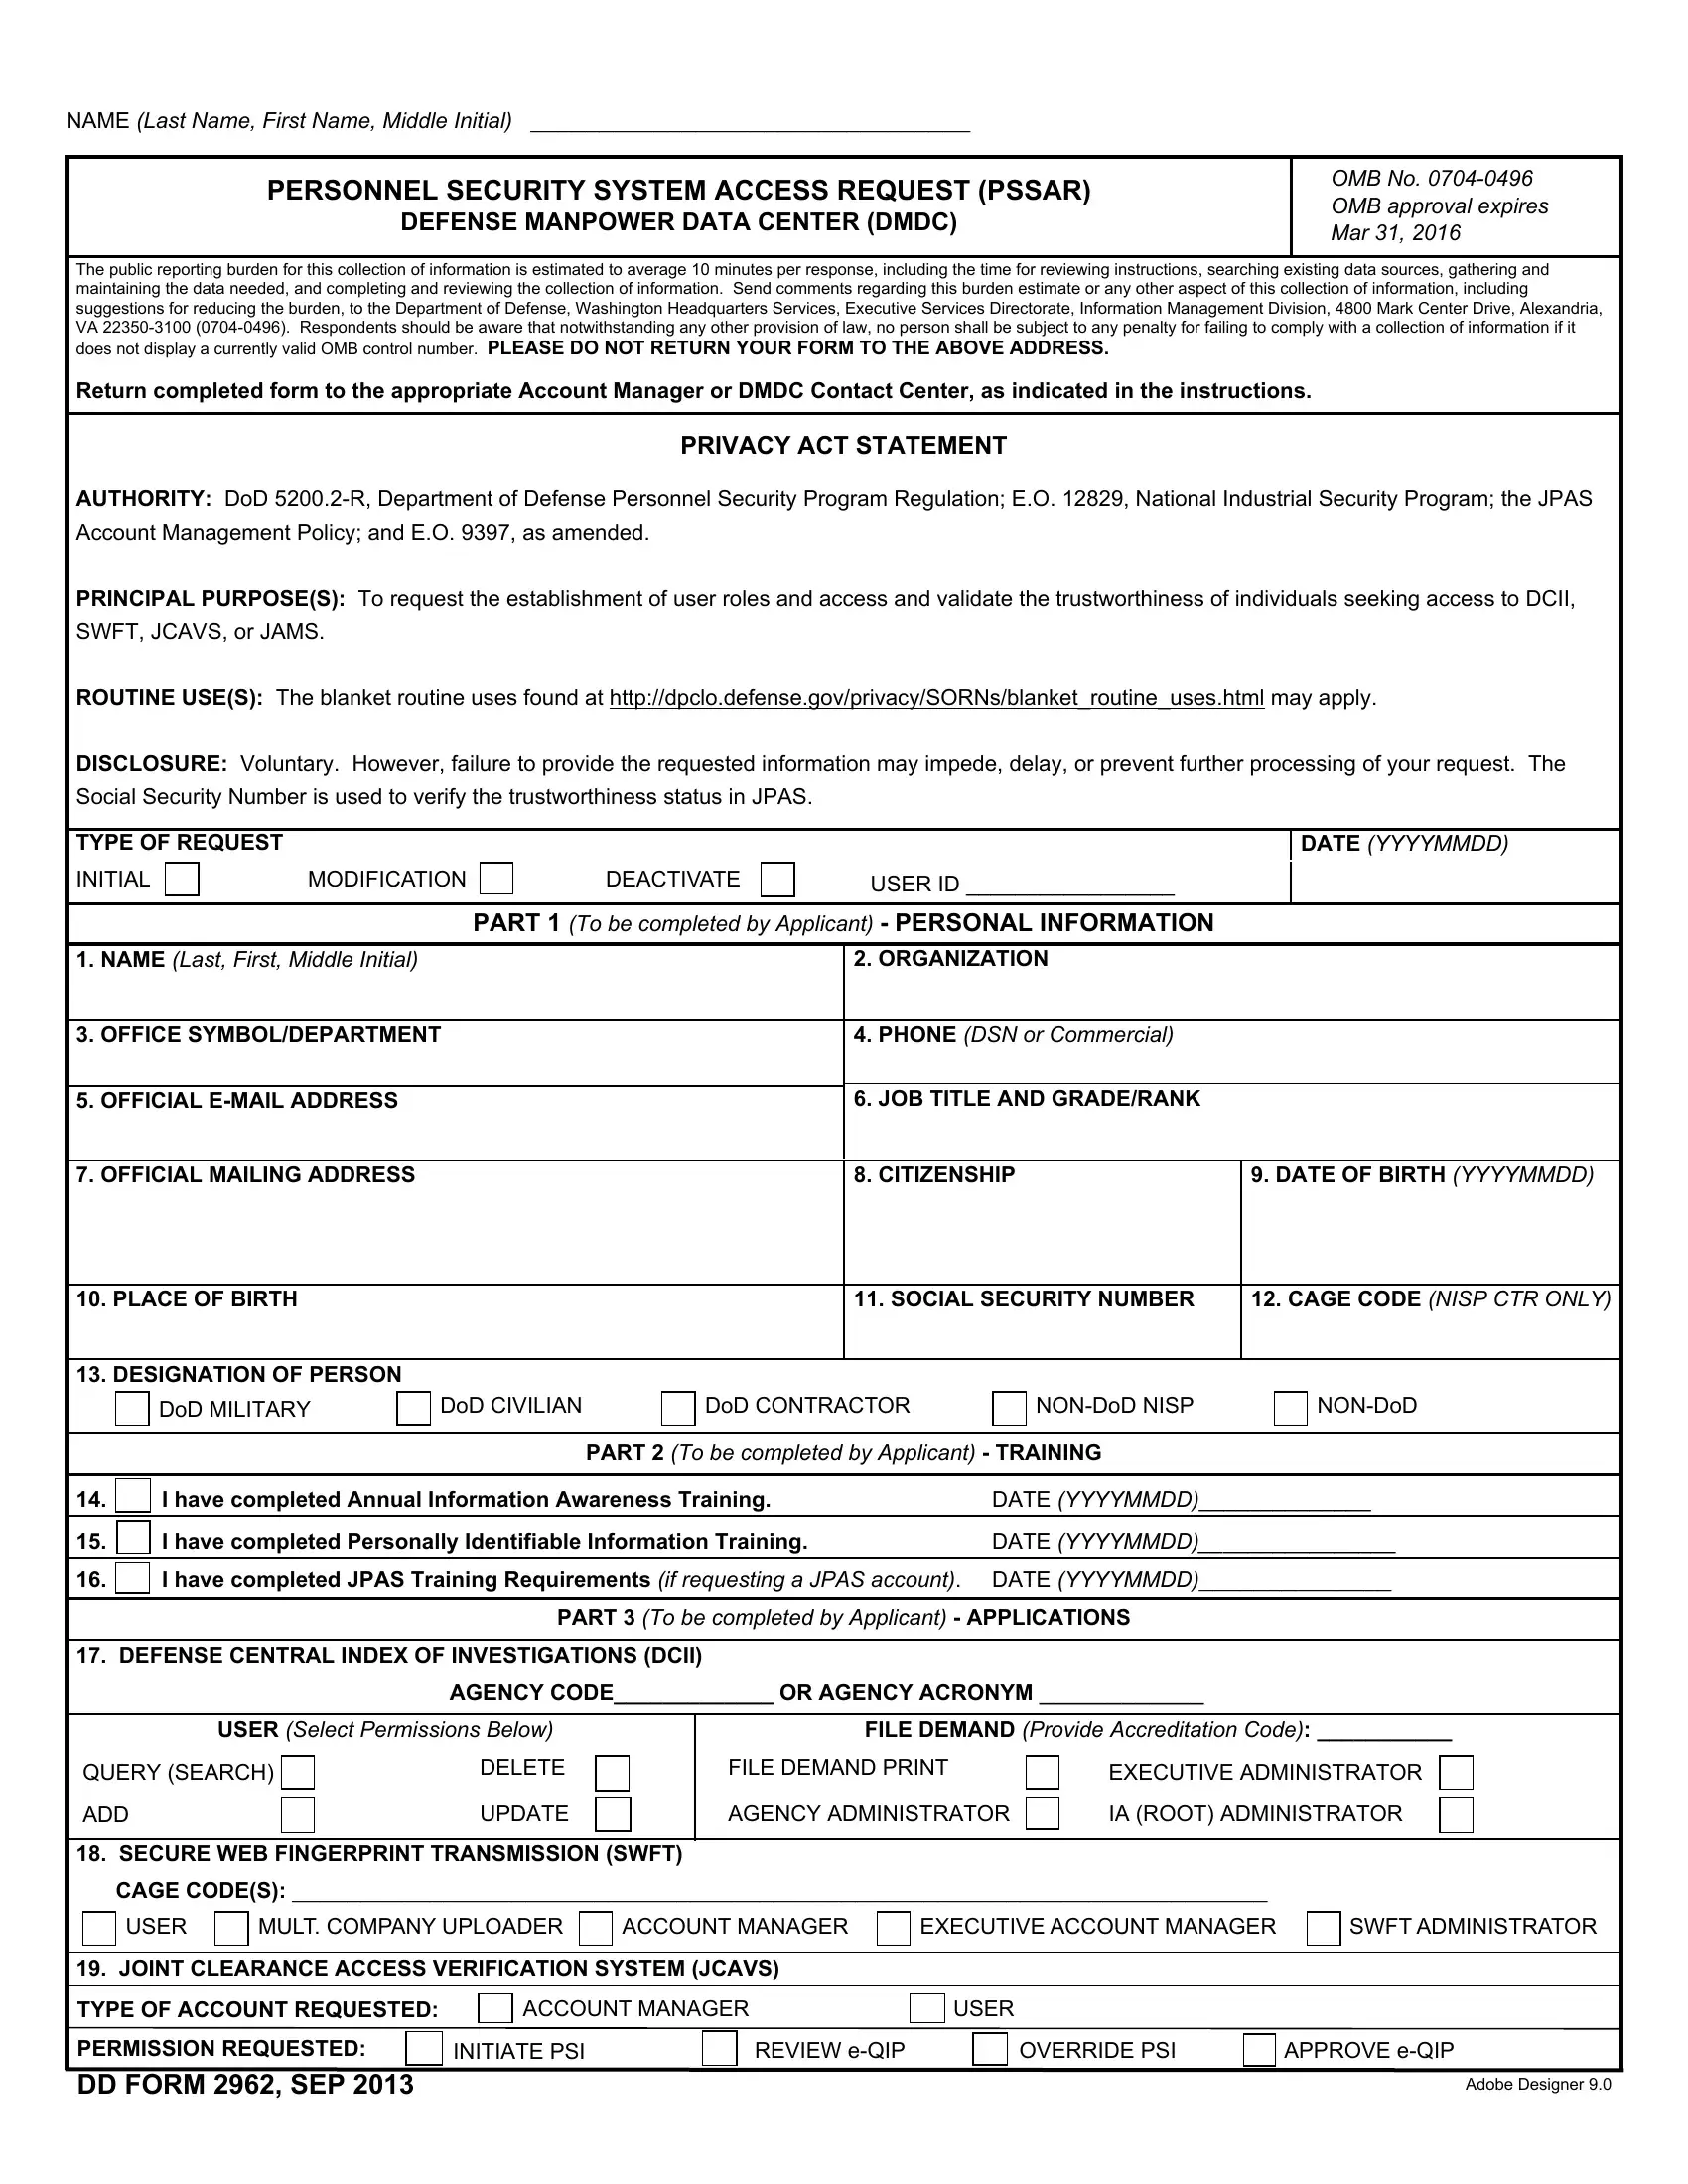 dd-form-2962-fill-out-printable-pdf-forms-online